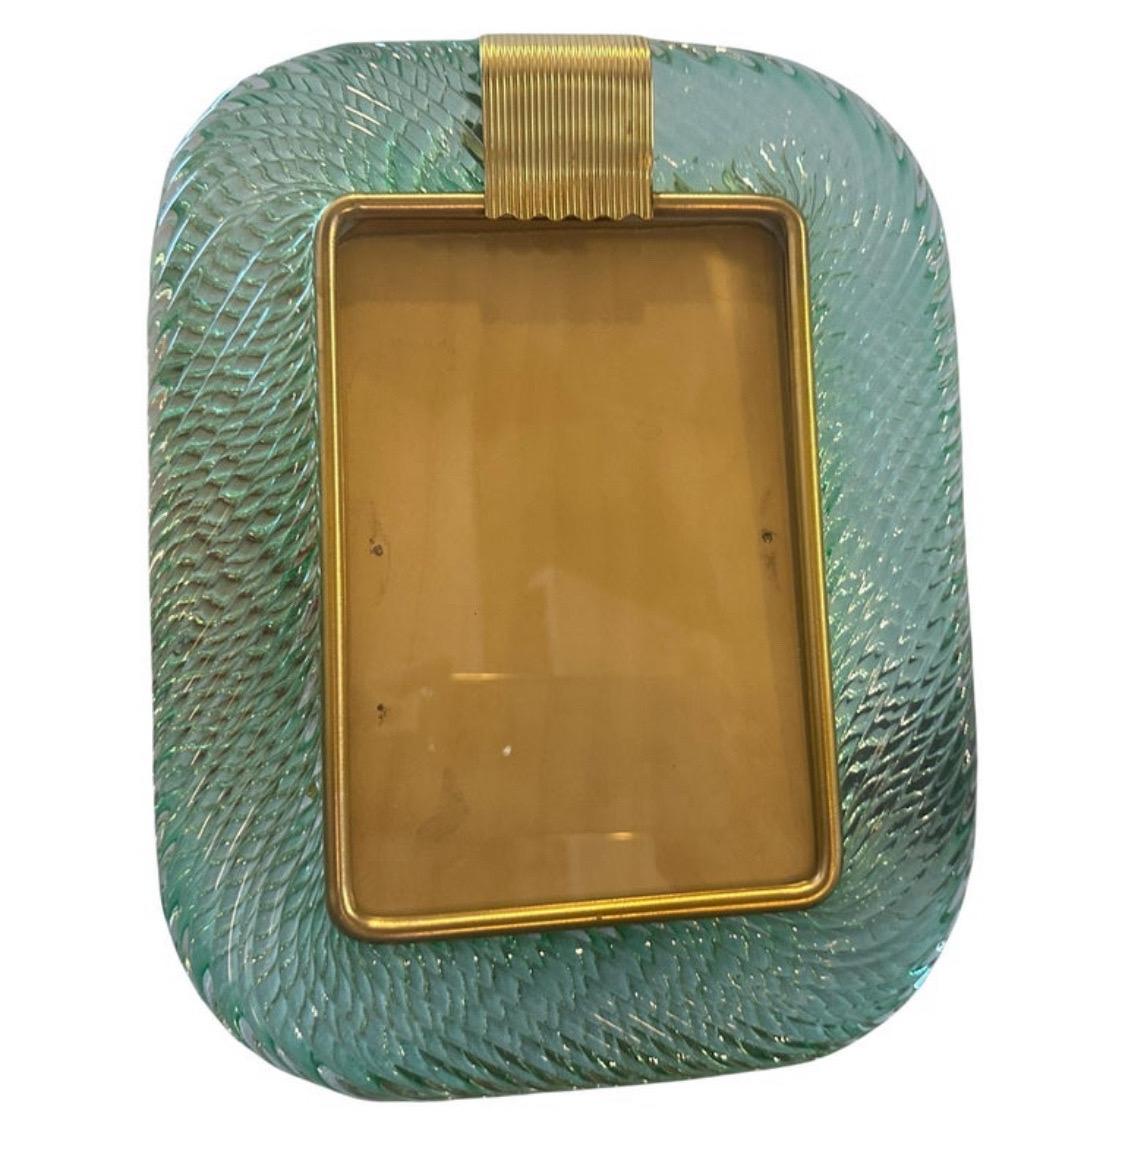 A light green murano glass picture frame designed and manufactured in Venice in the style of Barovier, it's in lovely conditions. The vintage photo frame is a beautiful and elegant piece of decor that is perfect for displaying your favorite memories